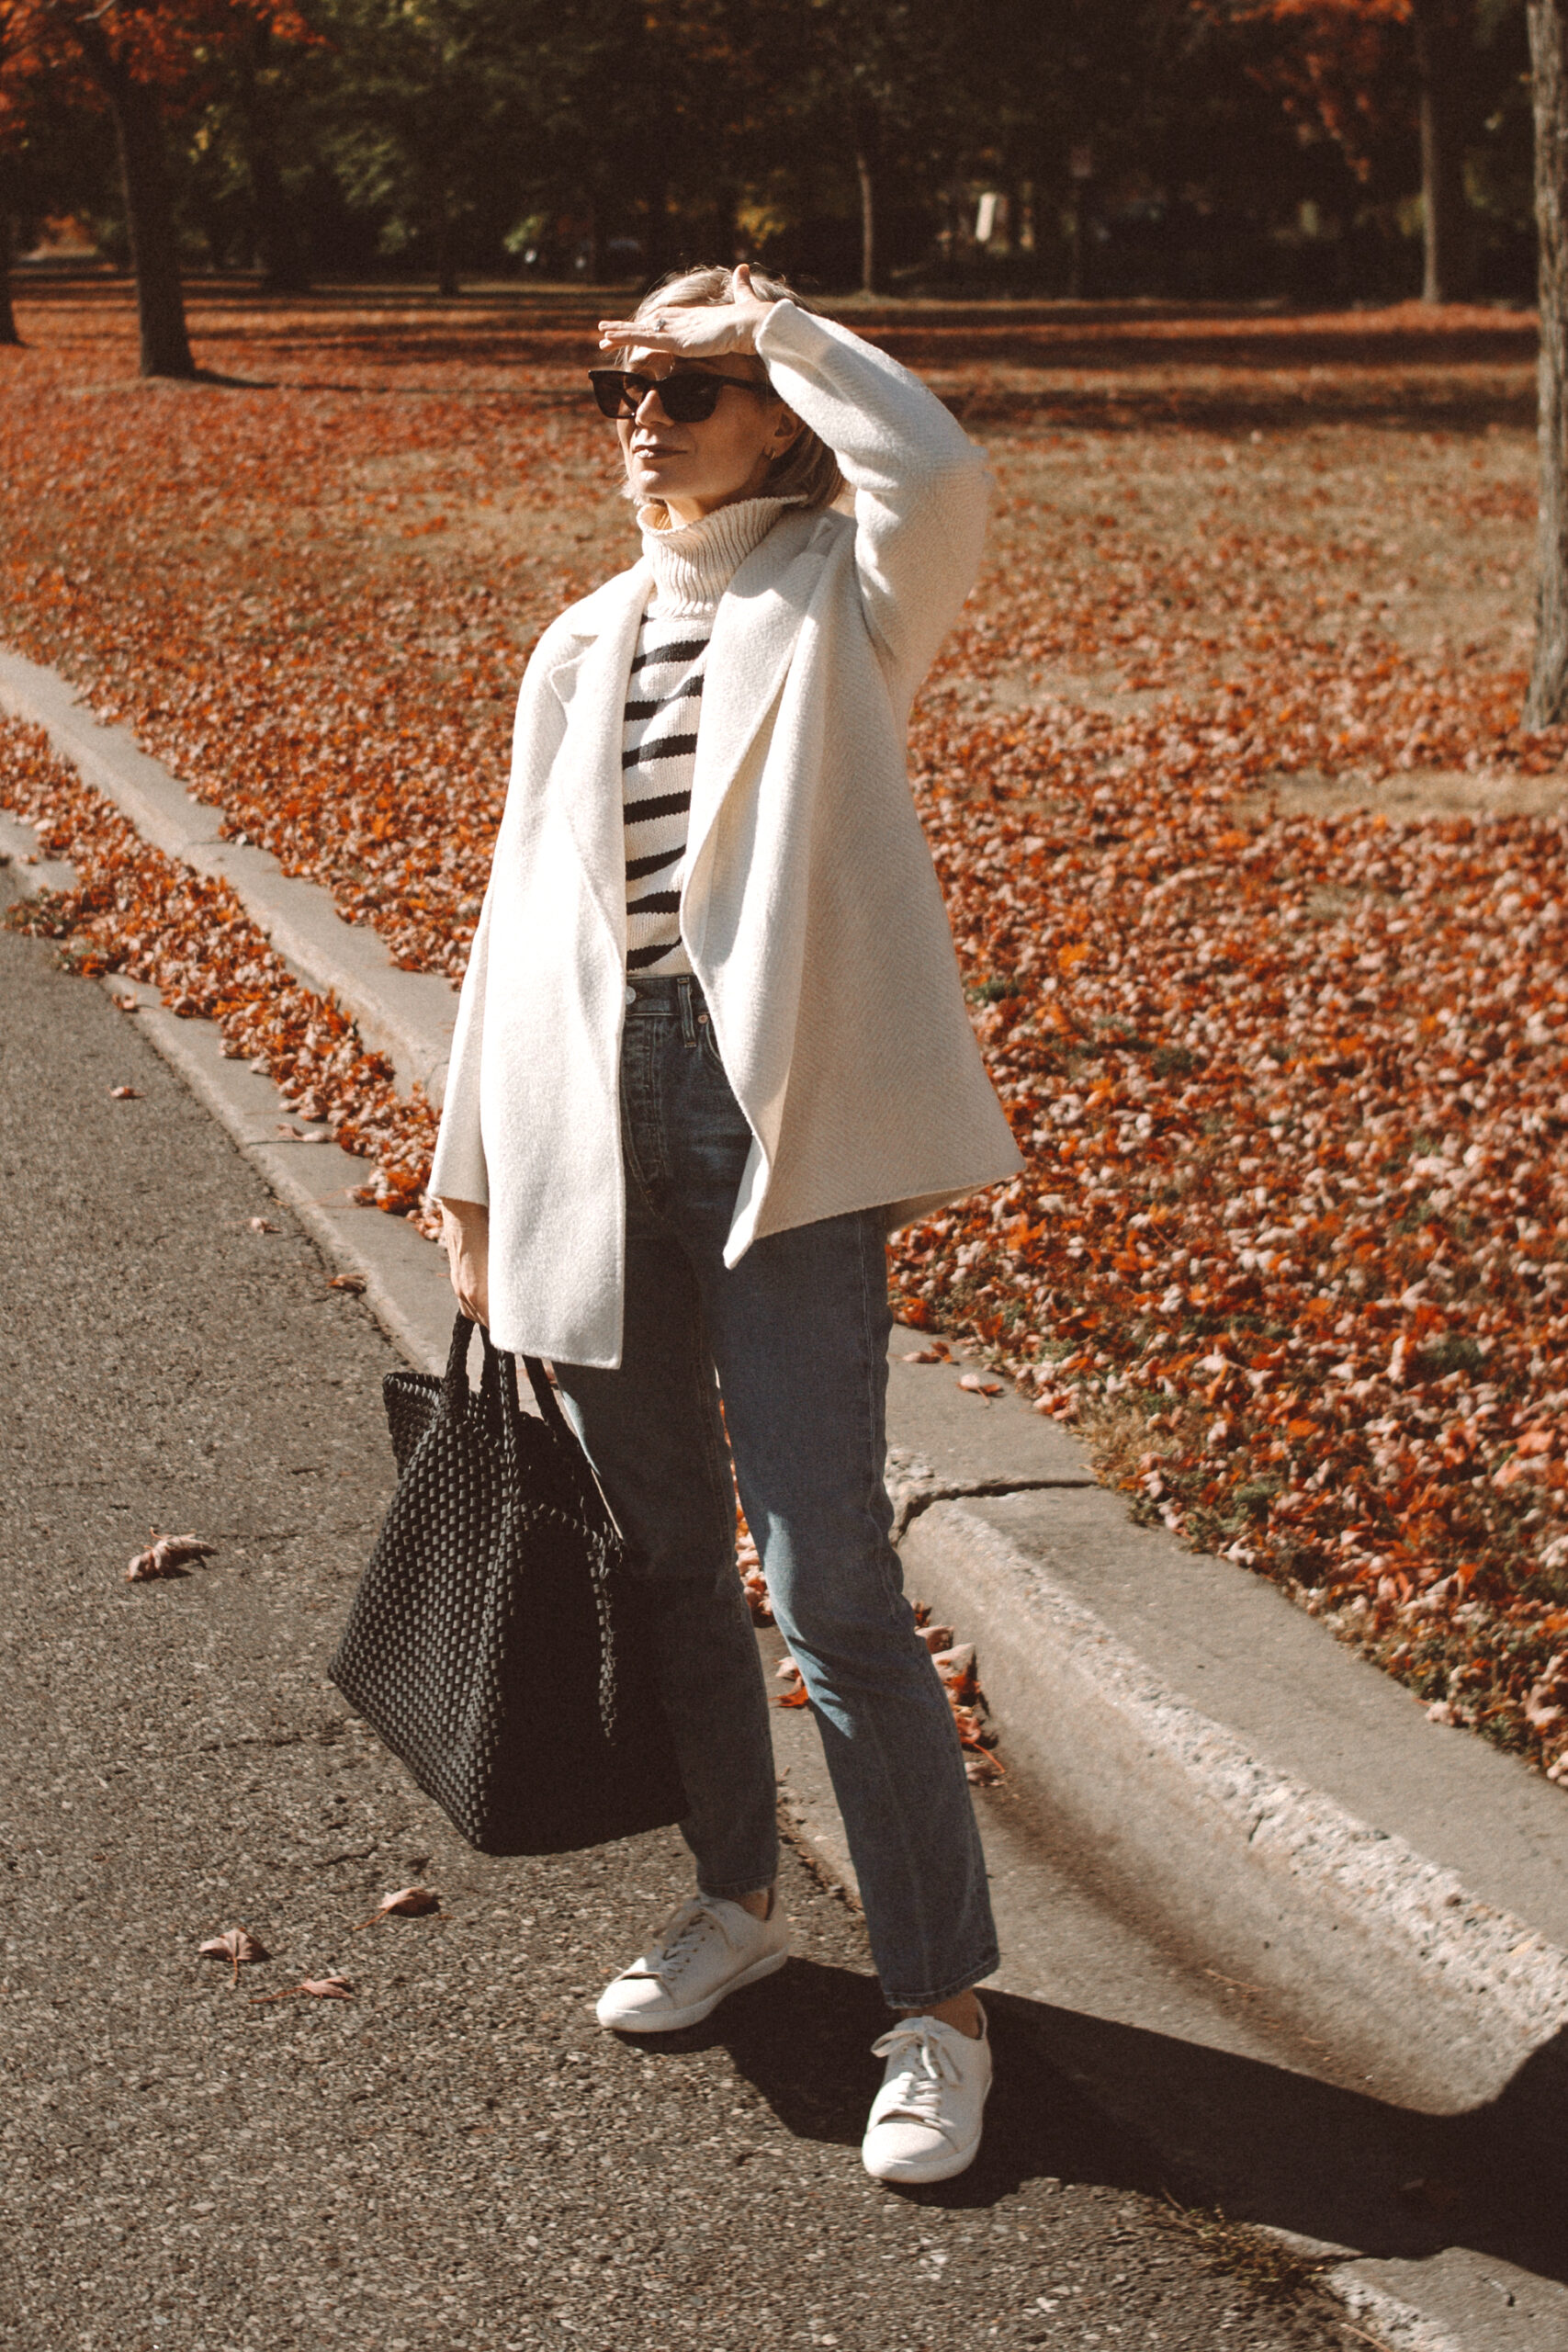 Karin Emily wears the Theory Clairene Jacket, a striped turtleneck sweater, citizens of humanity jolene jeans, sezane sneakers, and naghedi st barths large onyx bag while standing in front of a yard full of all leaves